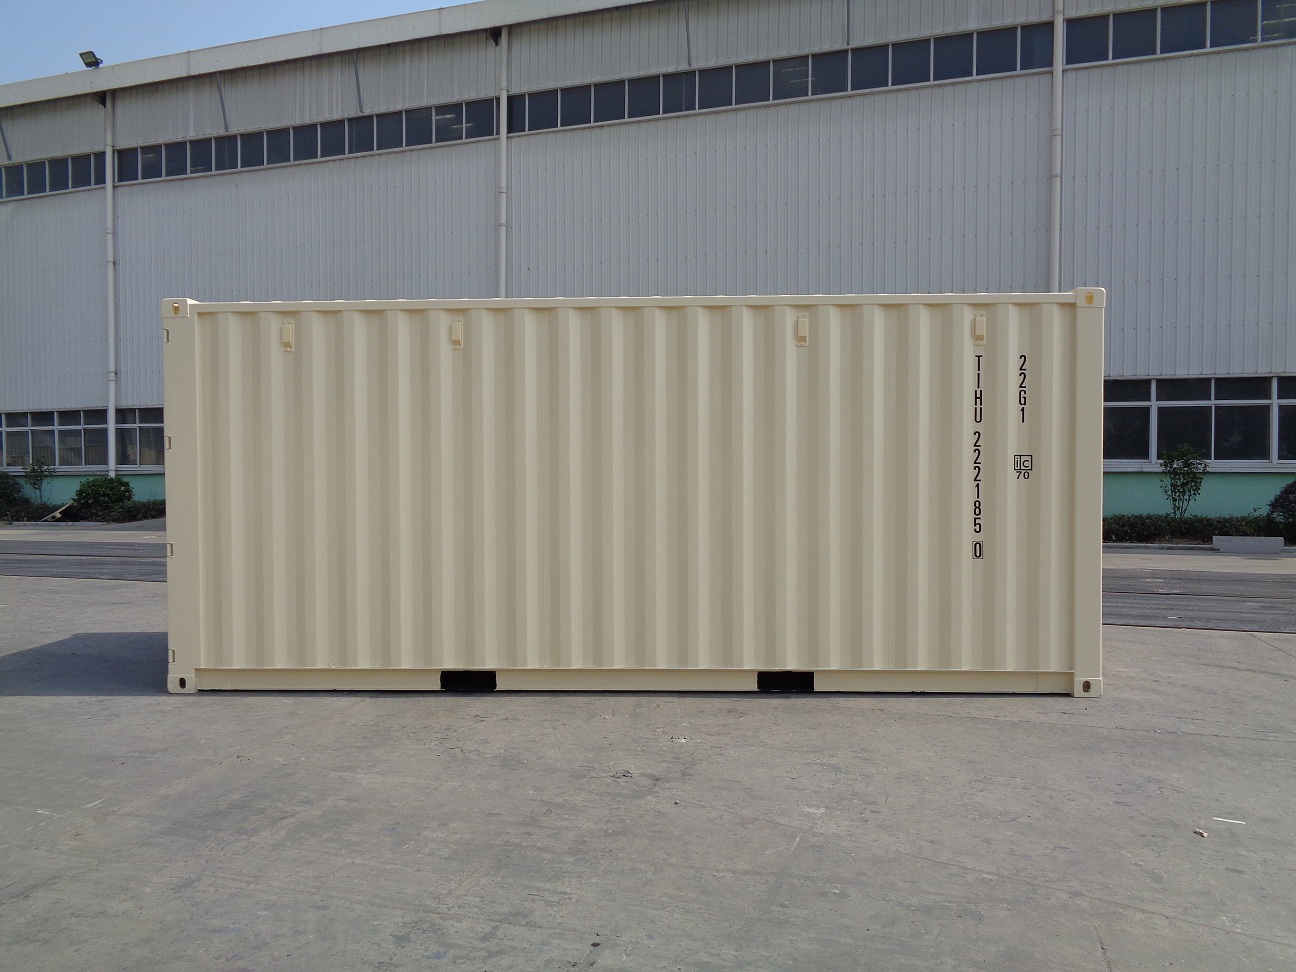 How much does a storage container cost in Hollywood